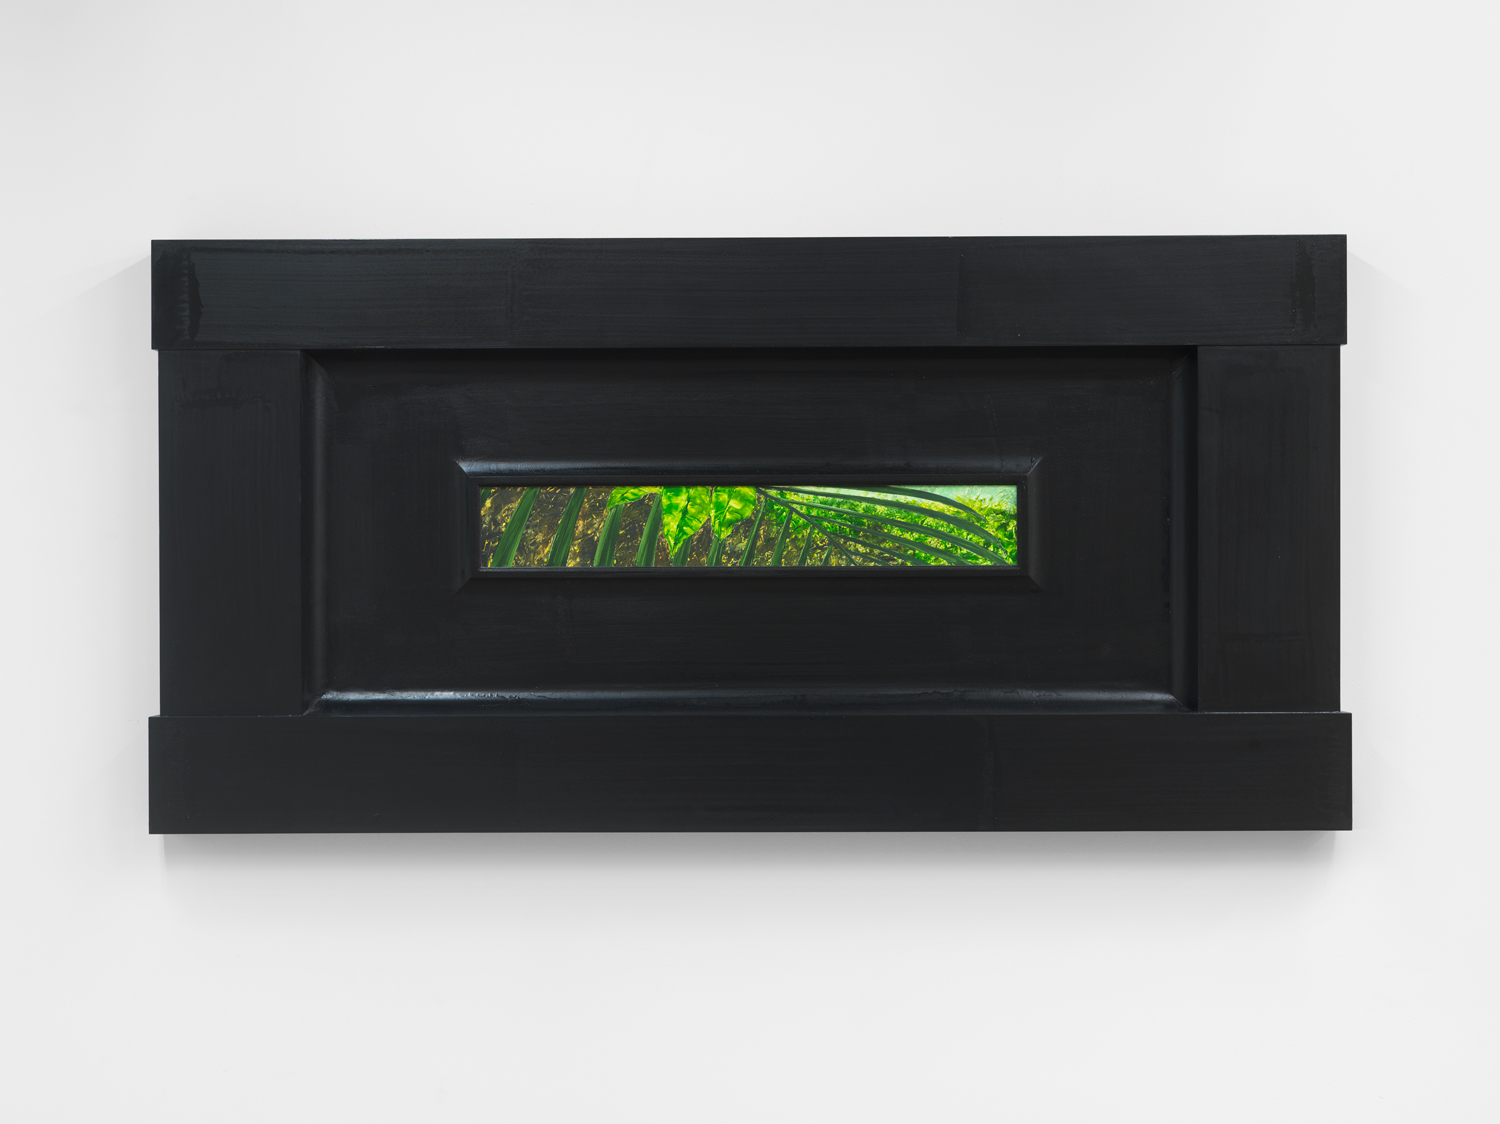 Neil Jenney, North American Vegetae, 2007, oil on canvas in artist's frame, 28.25h x 57.50w x 3.50d in.